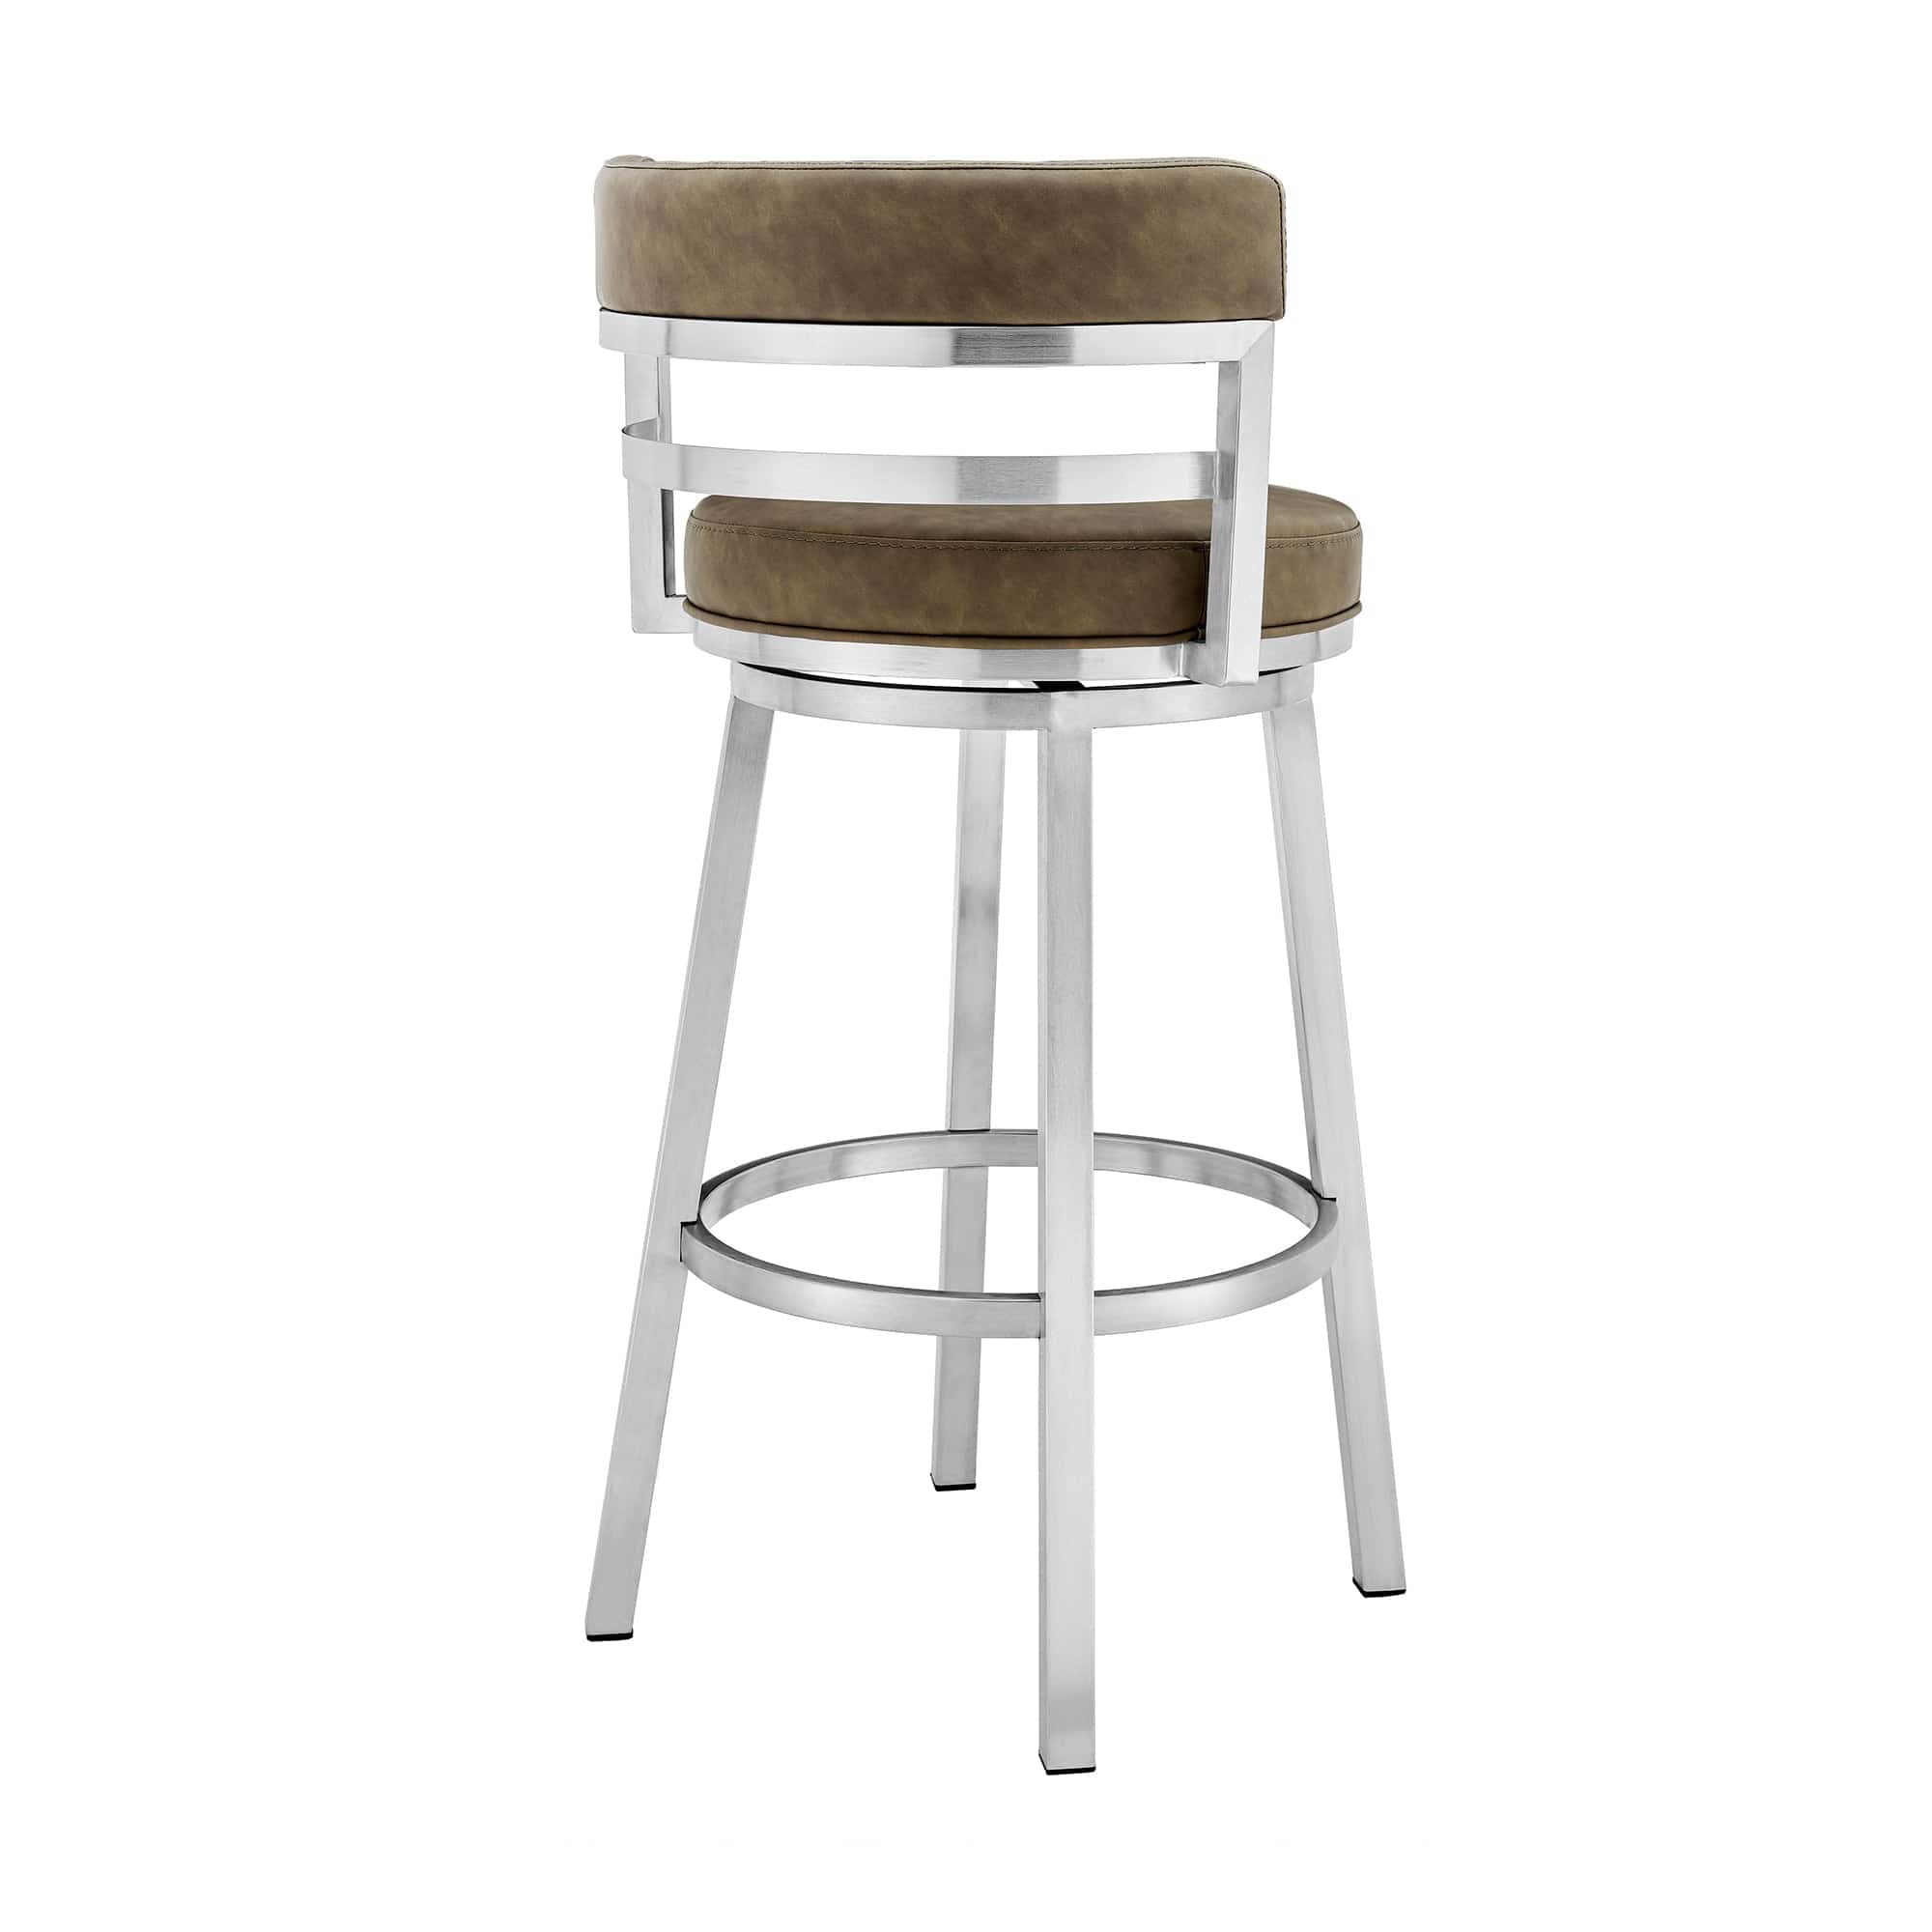 Armen Living Barstool Armen Living | Madrid 30" Bar Height Swivel Green Faux leather and Brushed Stainless Steel Bar Stool | LCMABABSGRN30